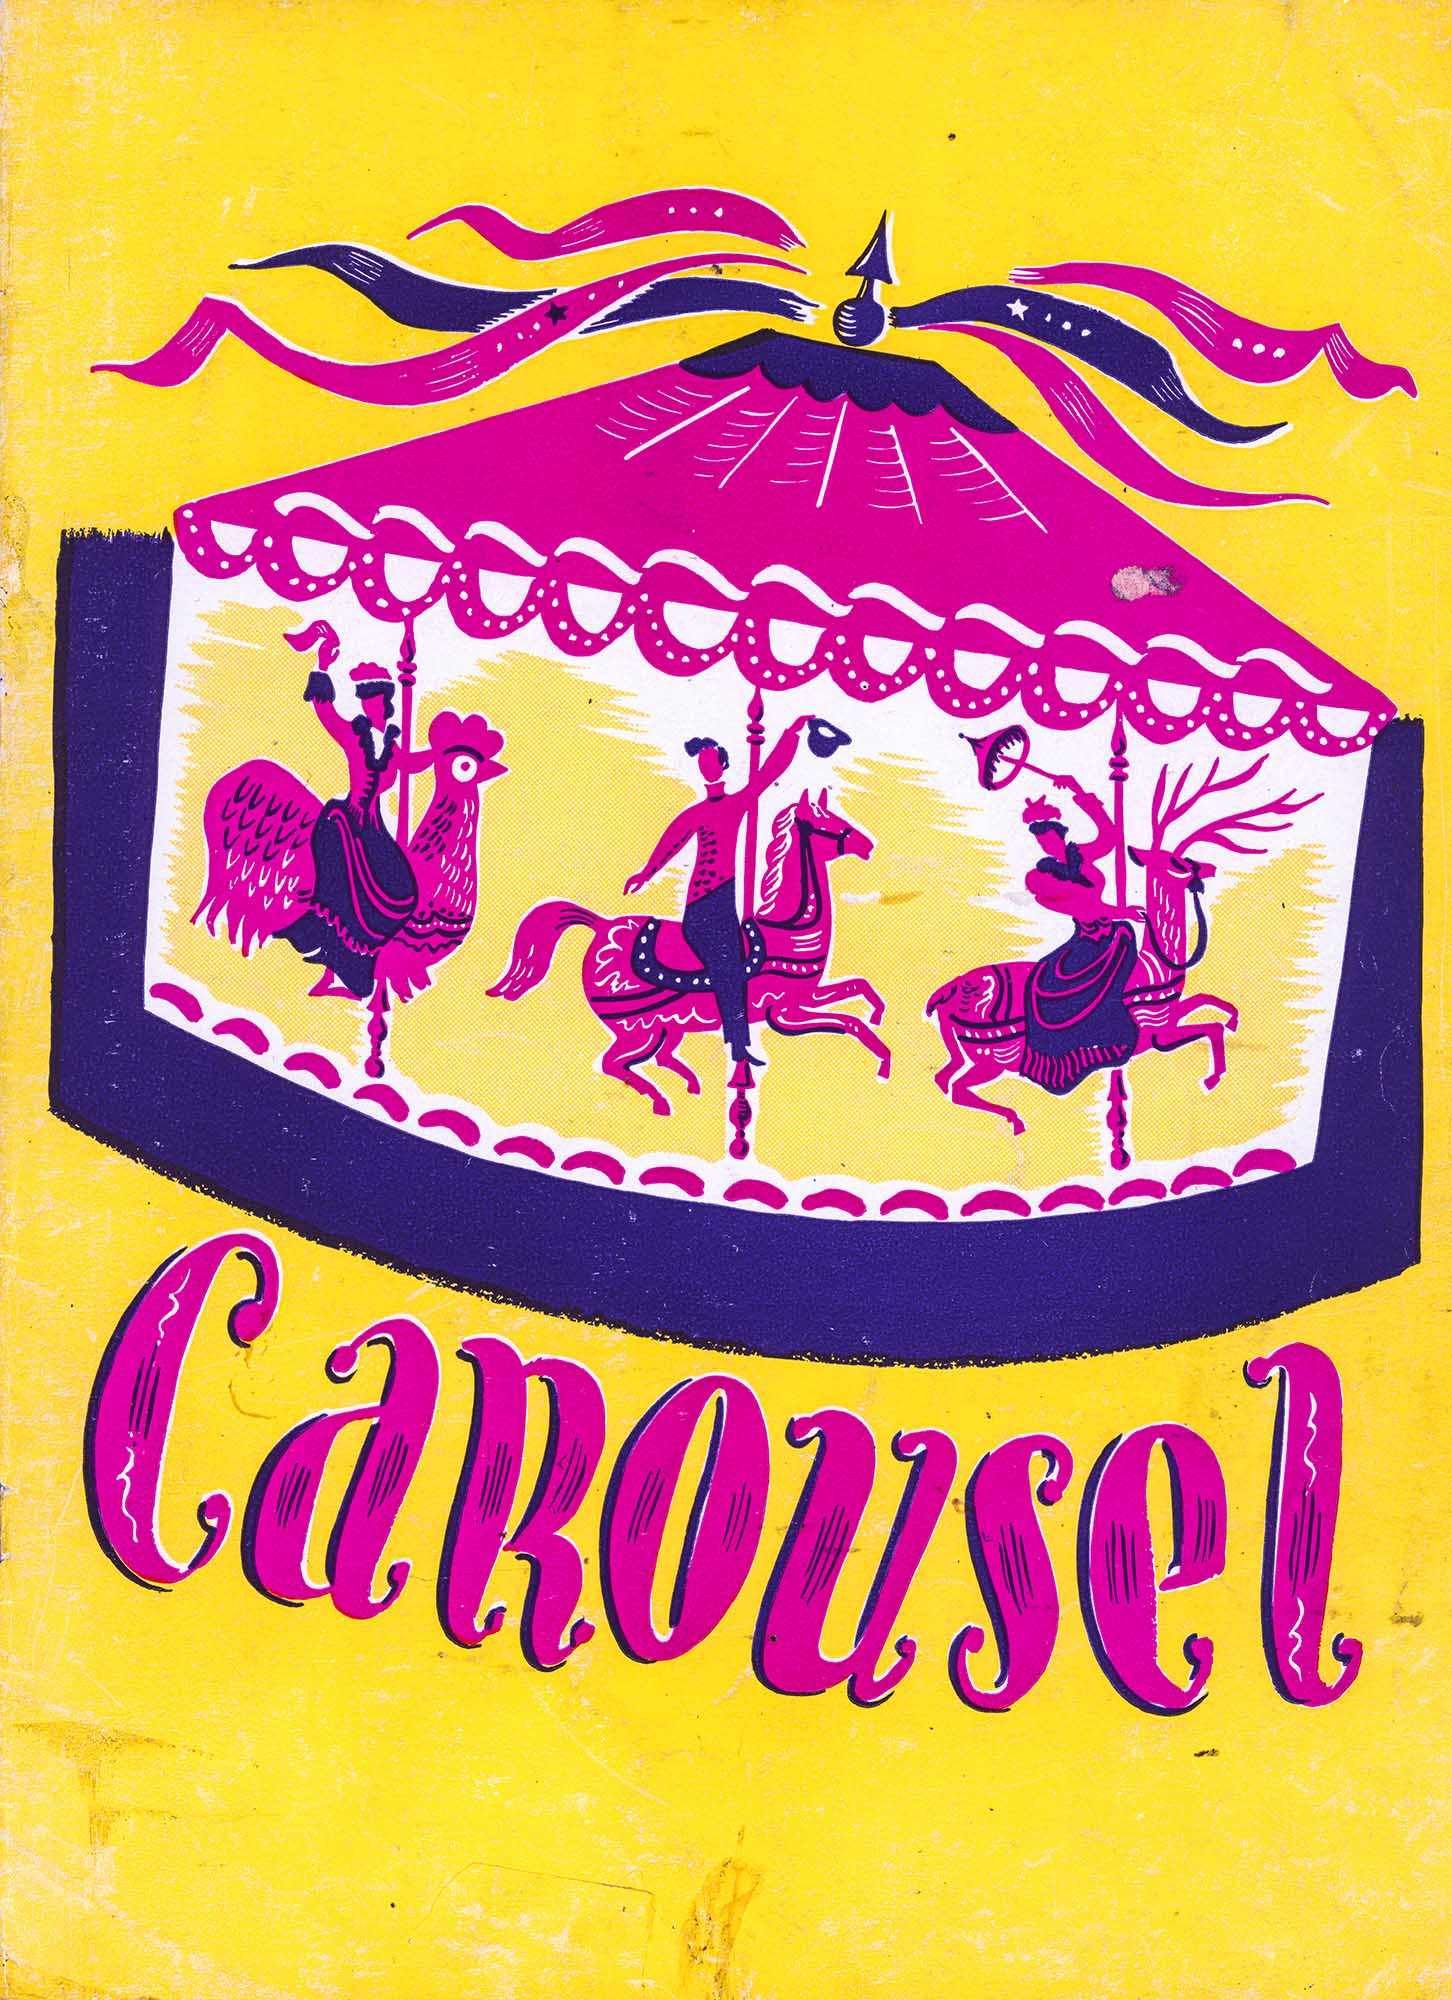 A souvenir booklet cover from the 1945 Broadway production of Carousel.